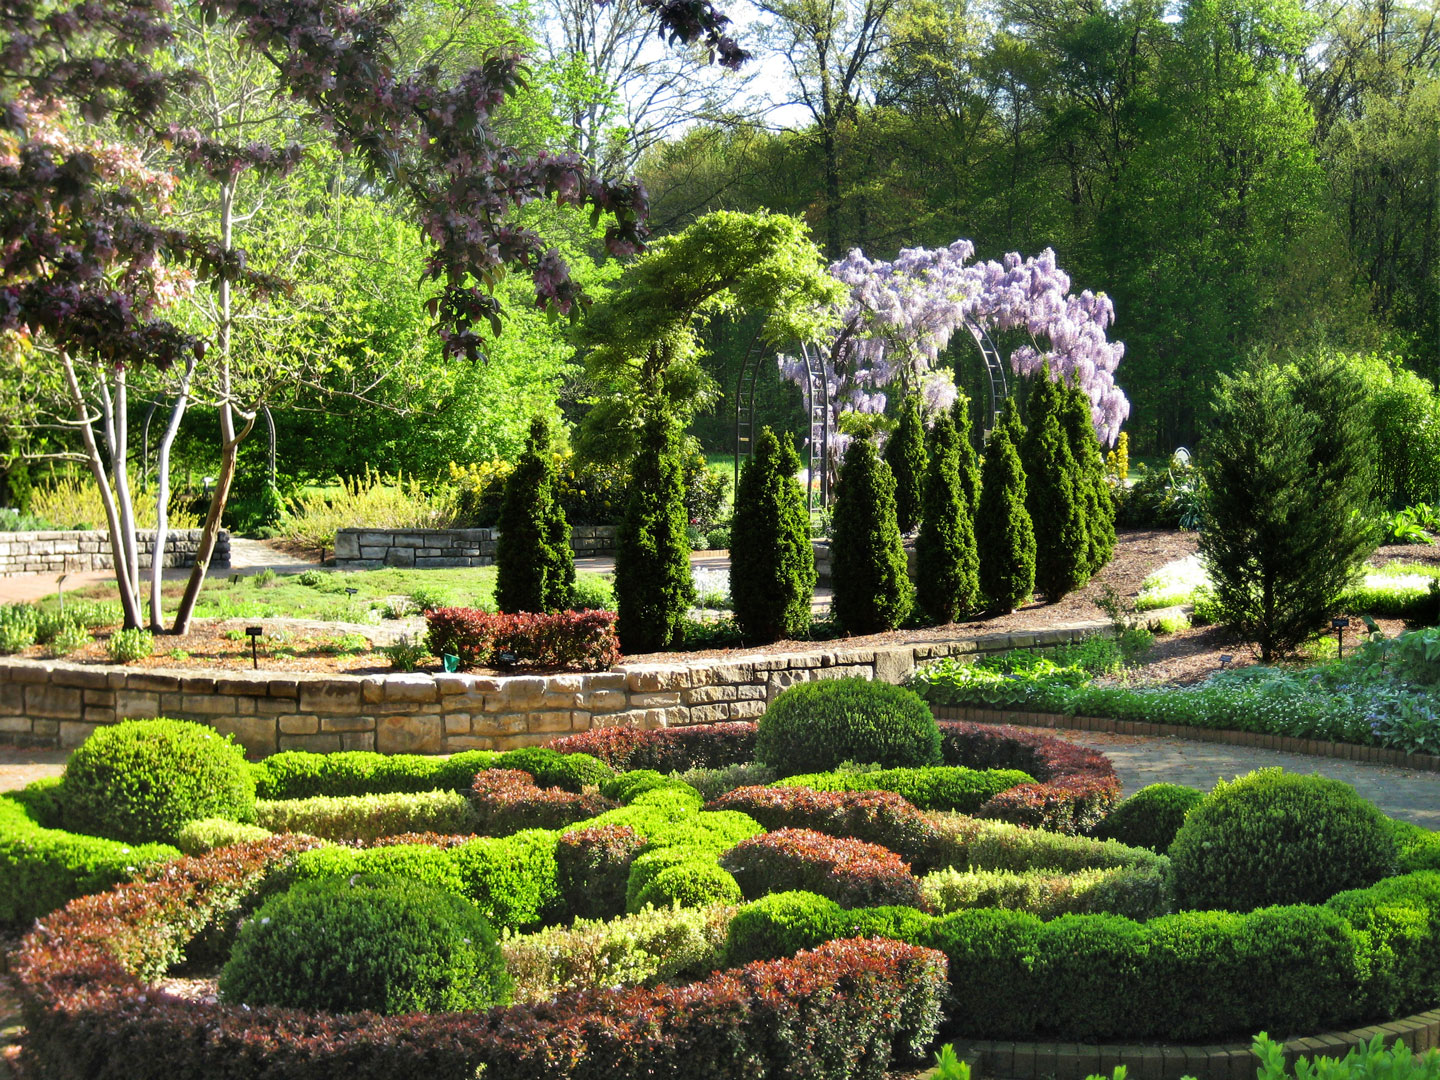 Knot Garden and wisteria at Inniswood